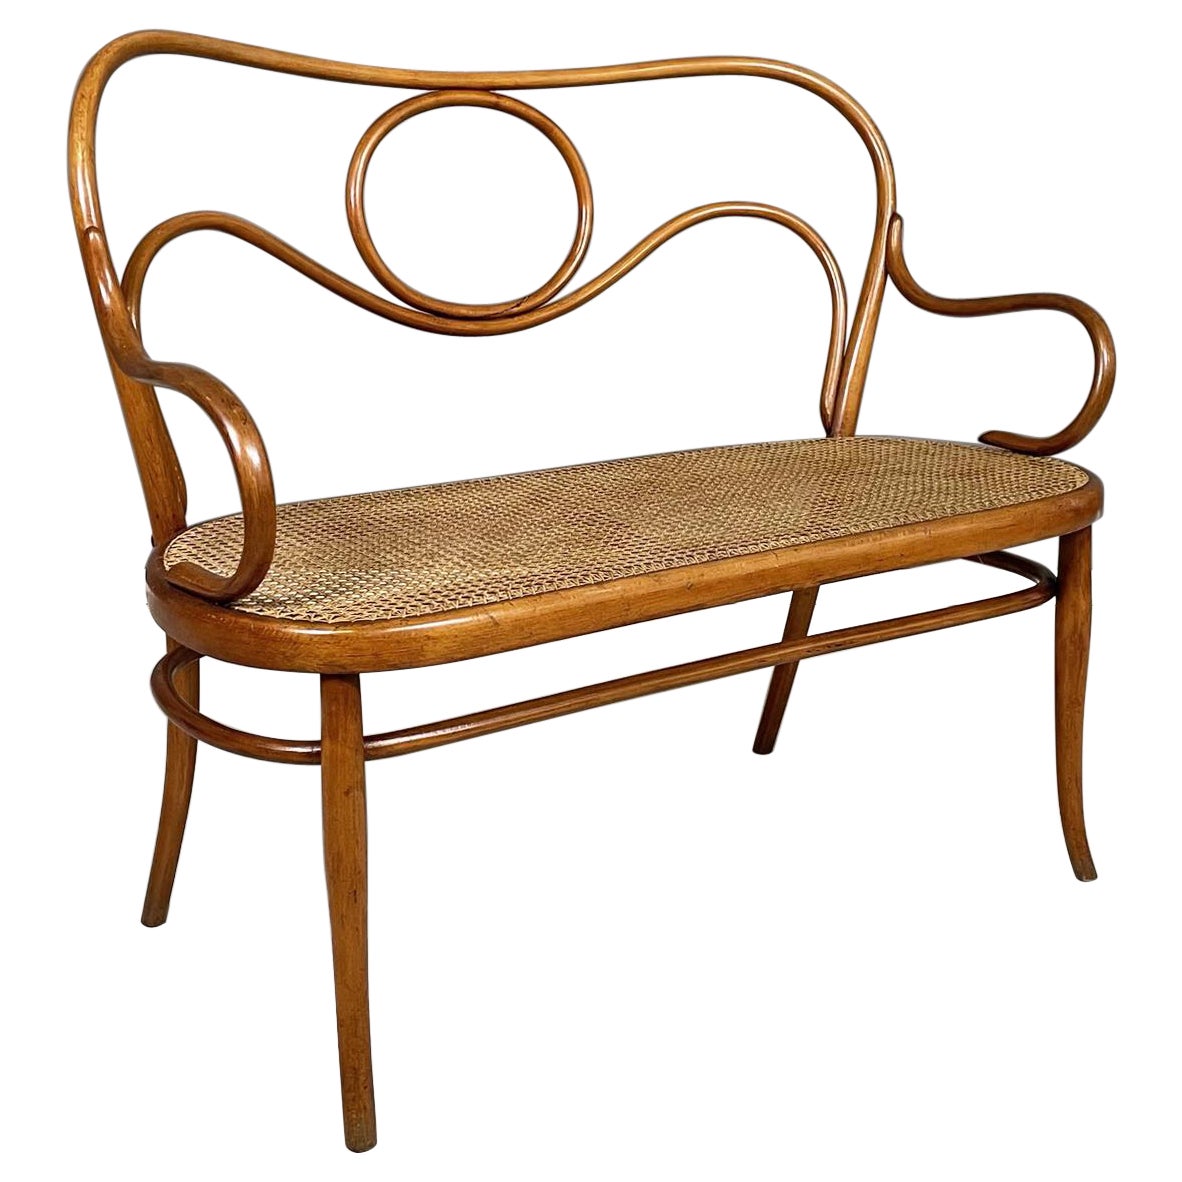 Austrian antique Wooden and Vienna straw two-seater bench by Thonet, early 1900s